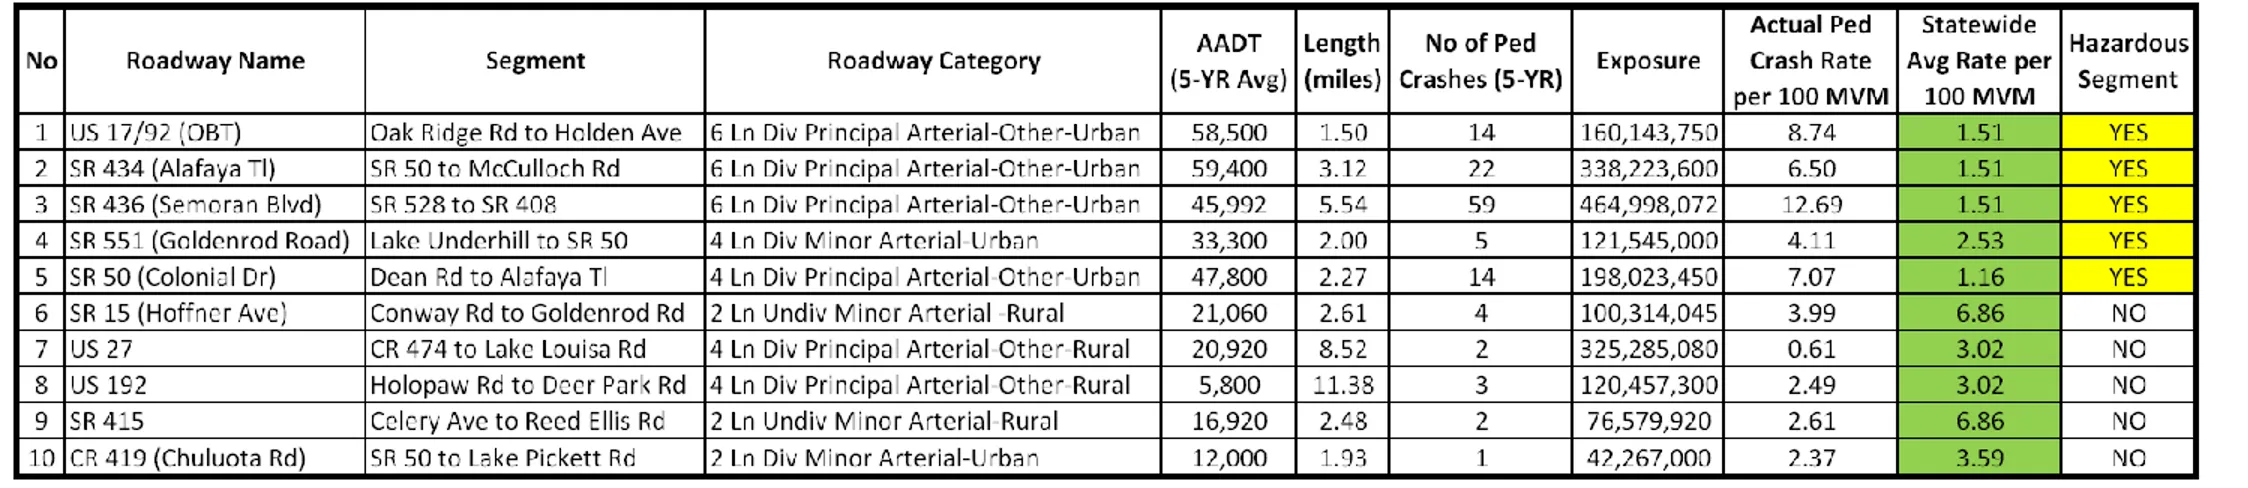 Table 1: Actual Crash Rates versus Statewide Averages for Roadway Pilot Study 